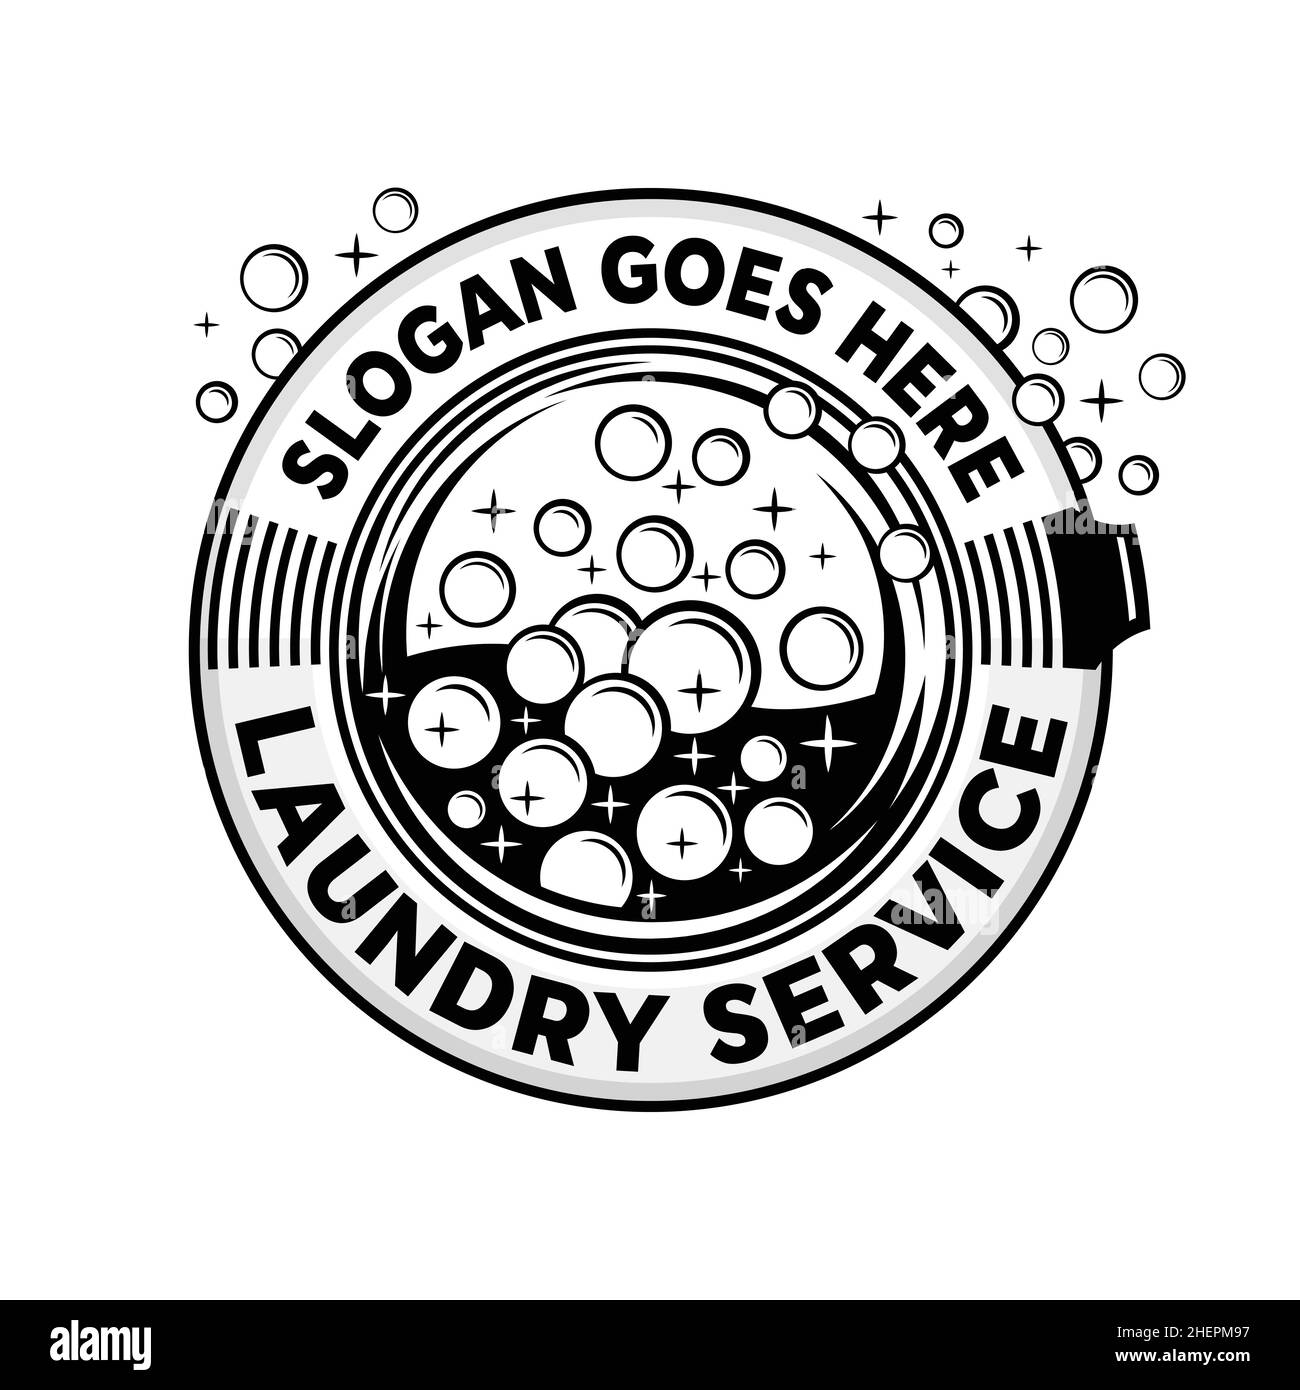 Laundry service logo. Vector and illustration. Stock Vector